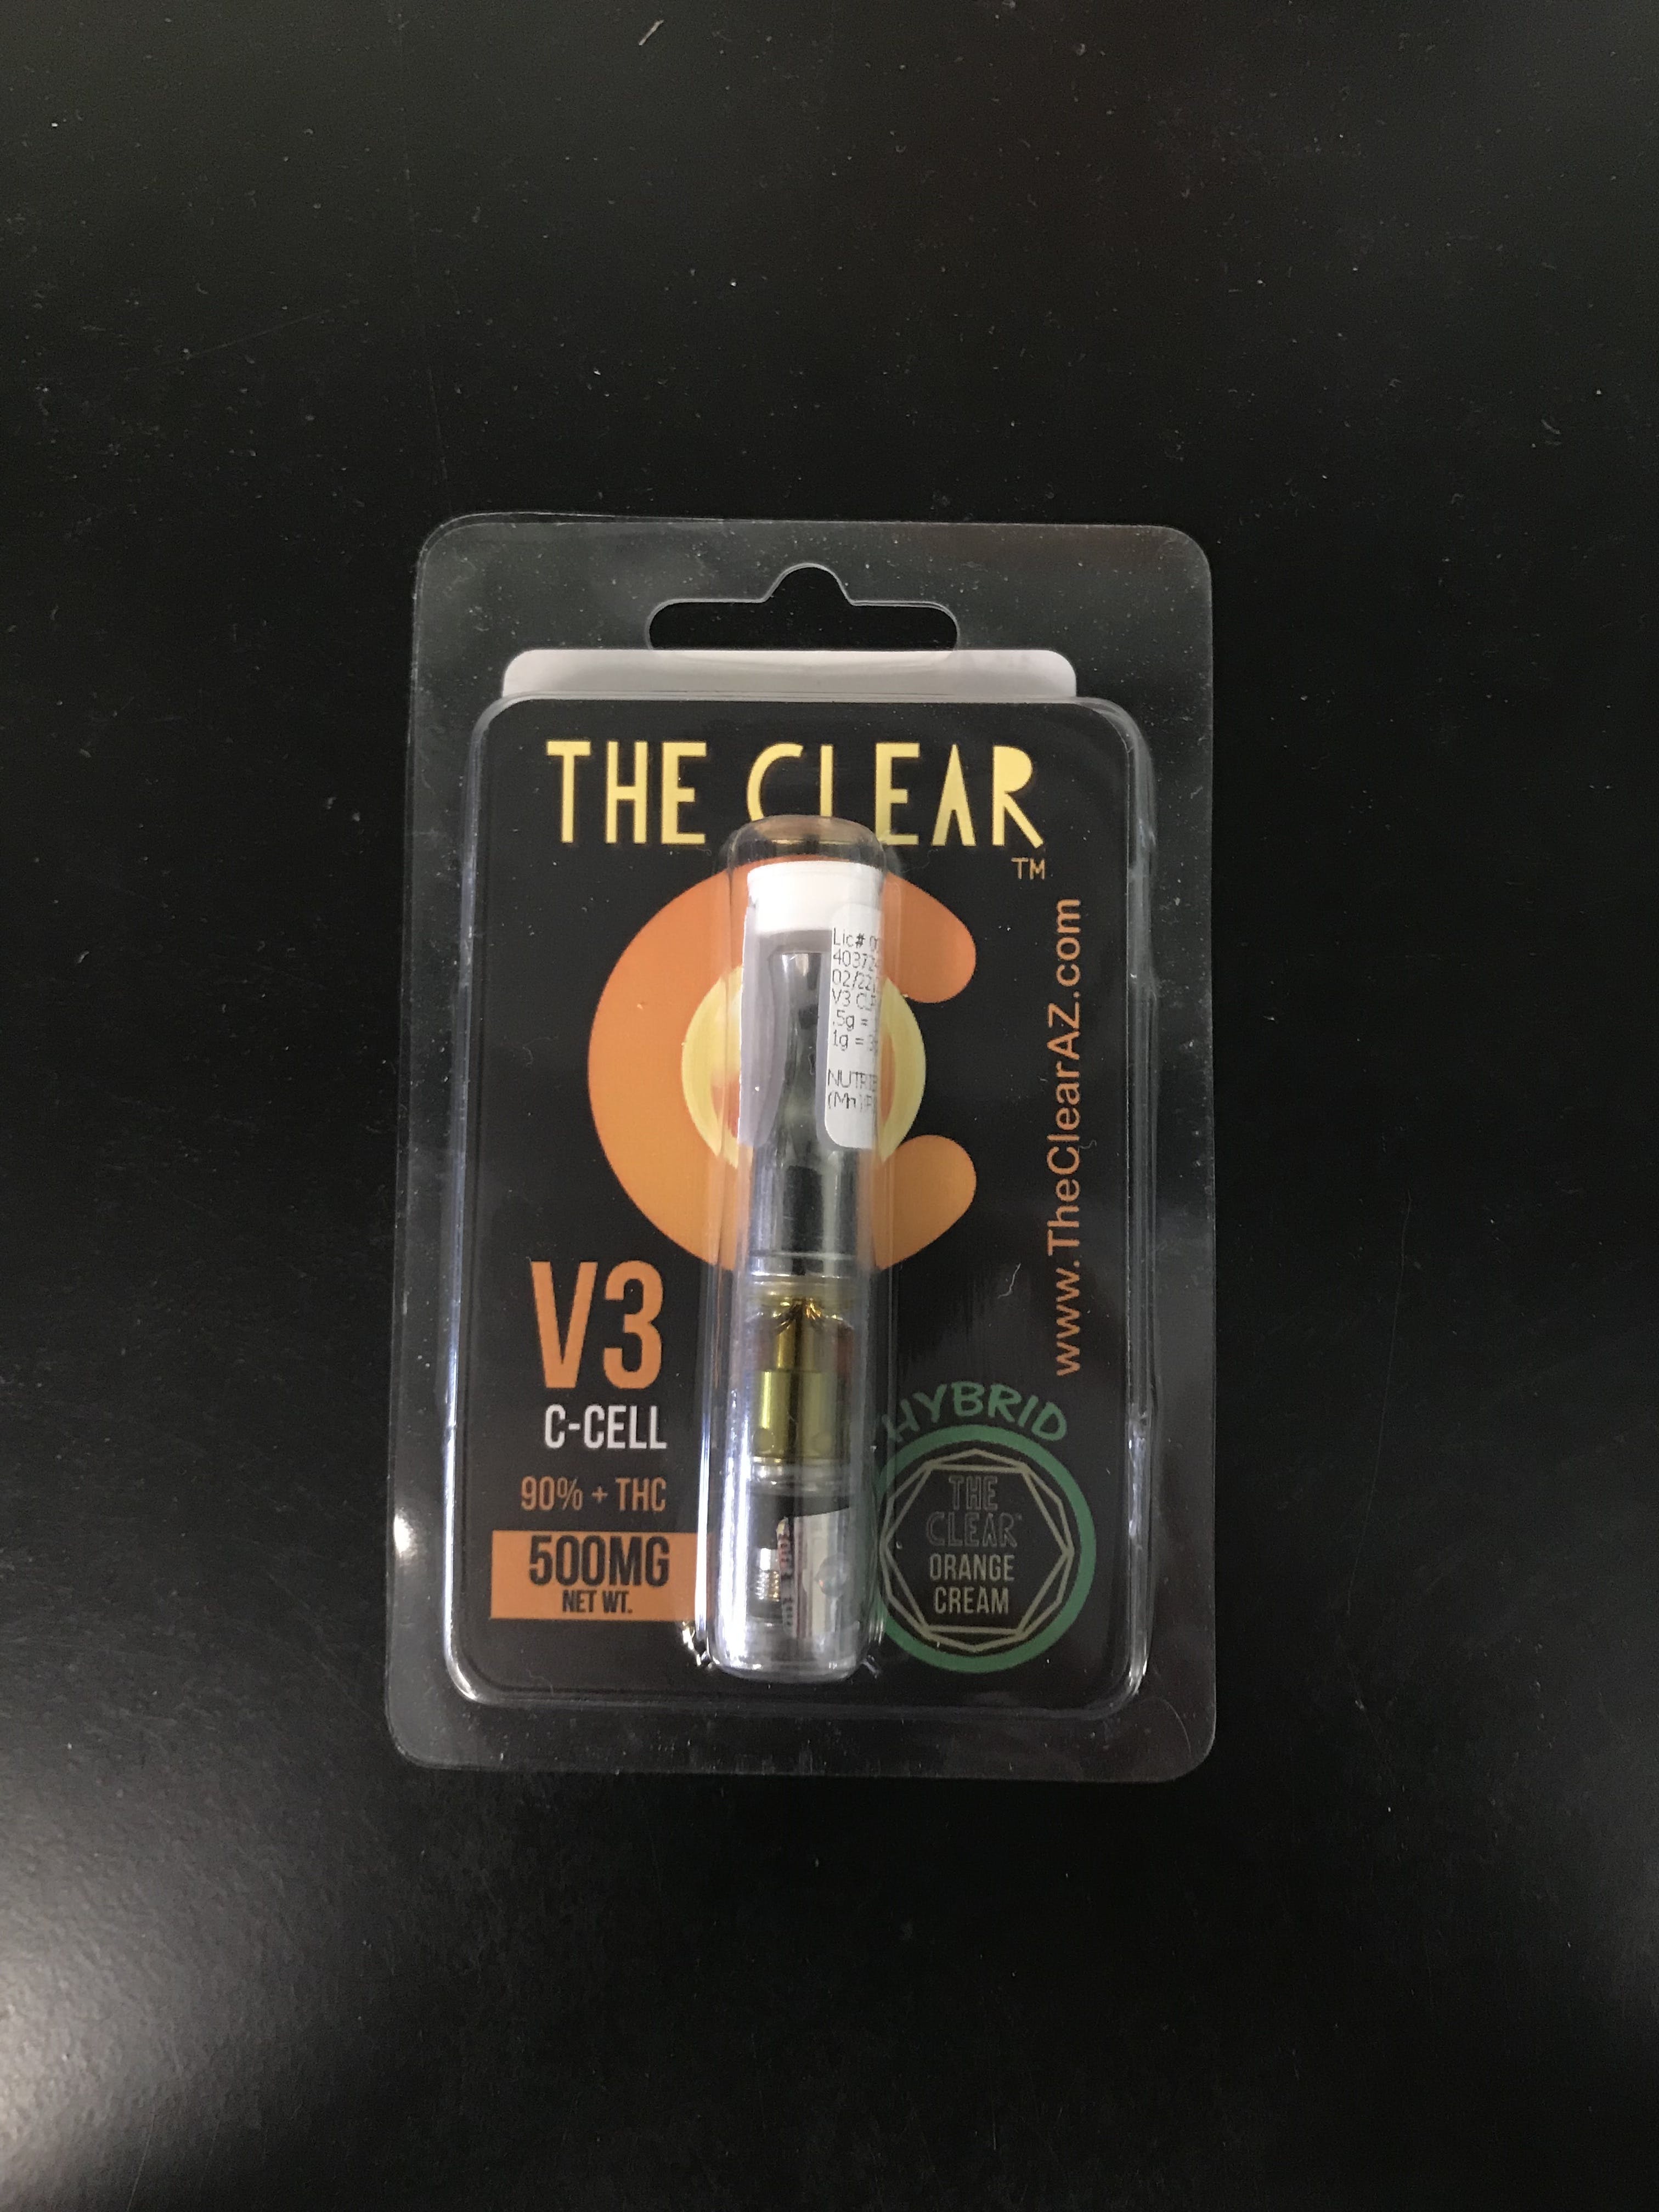 concentrate-the-clear-v3-orange-cream-500mg-cartridge